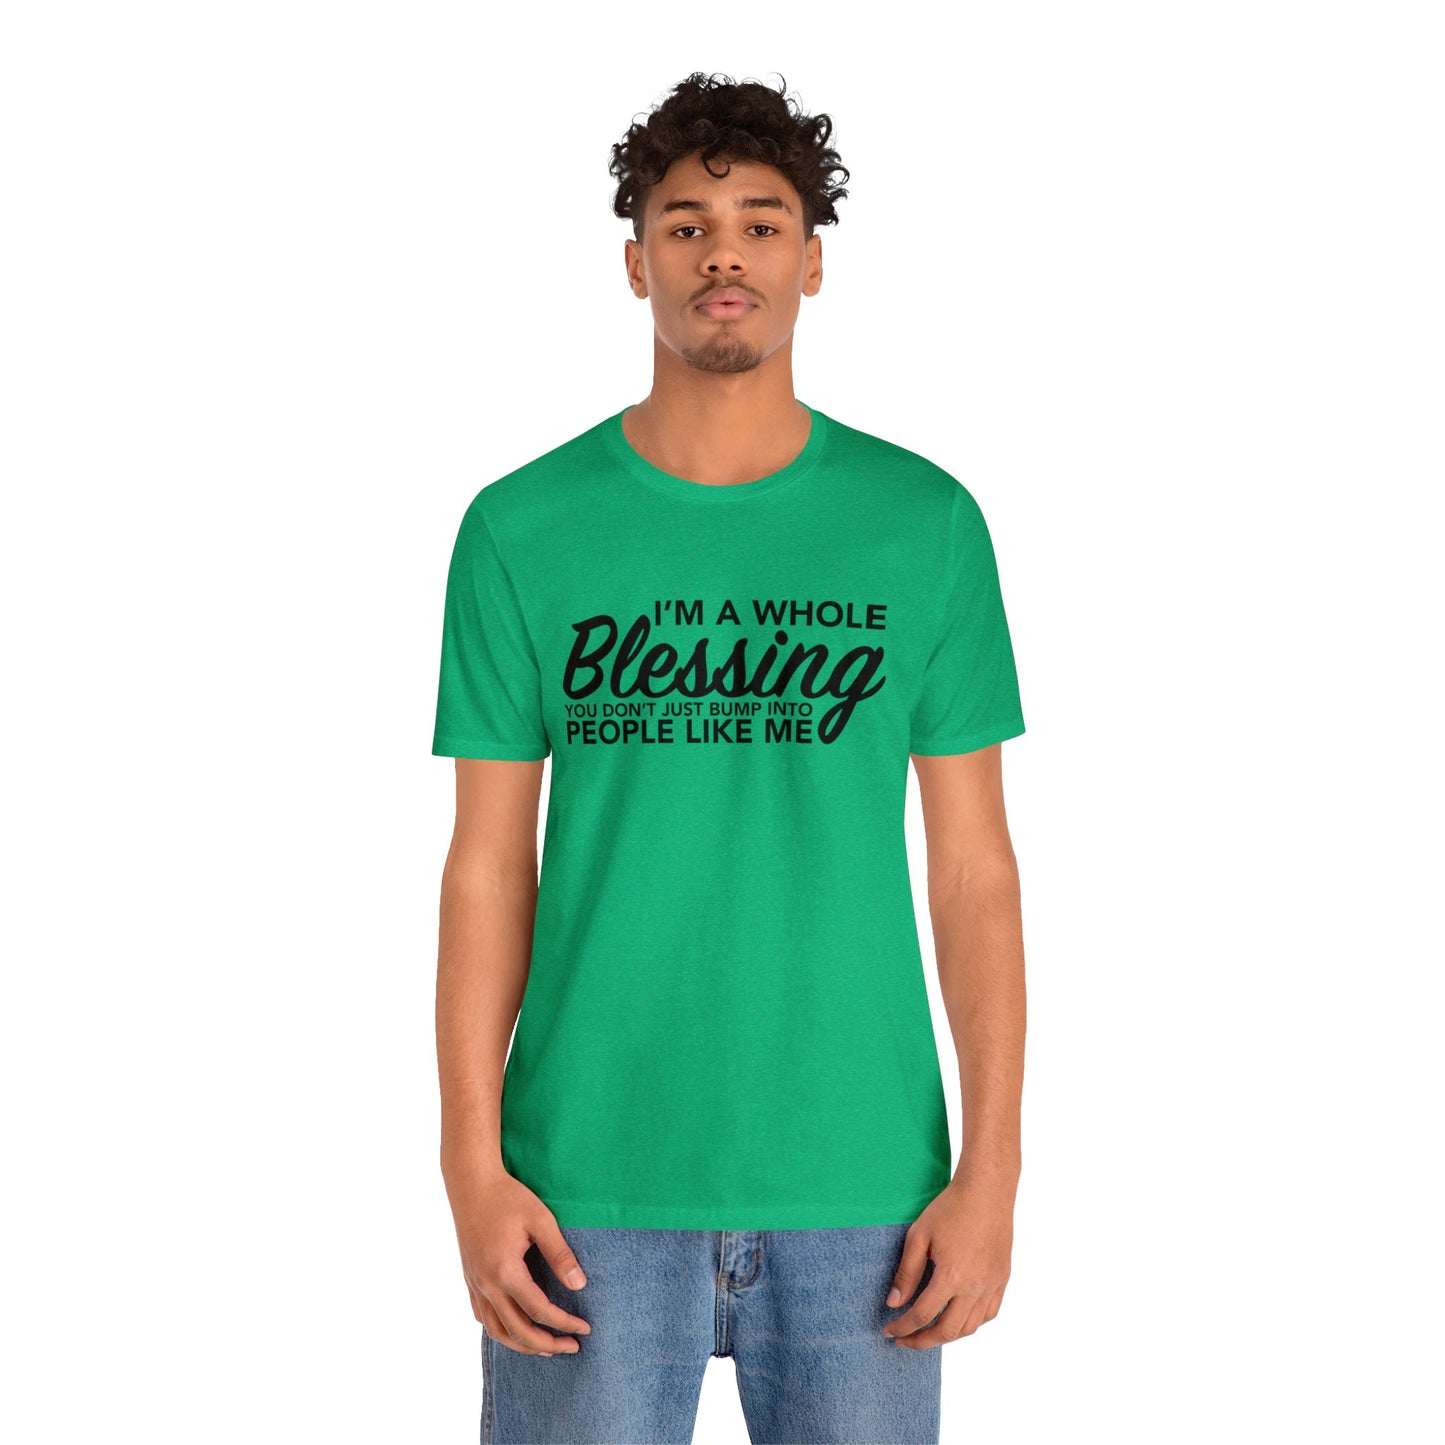 I’m a whole blessing Tee